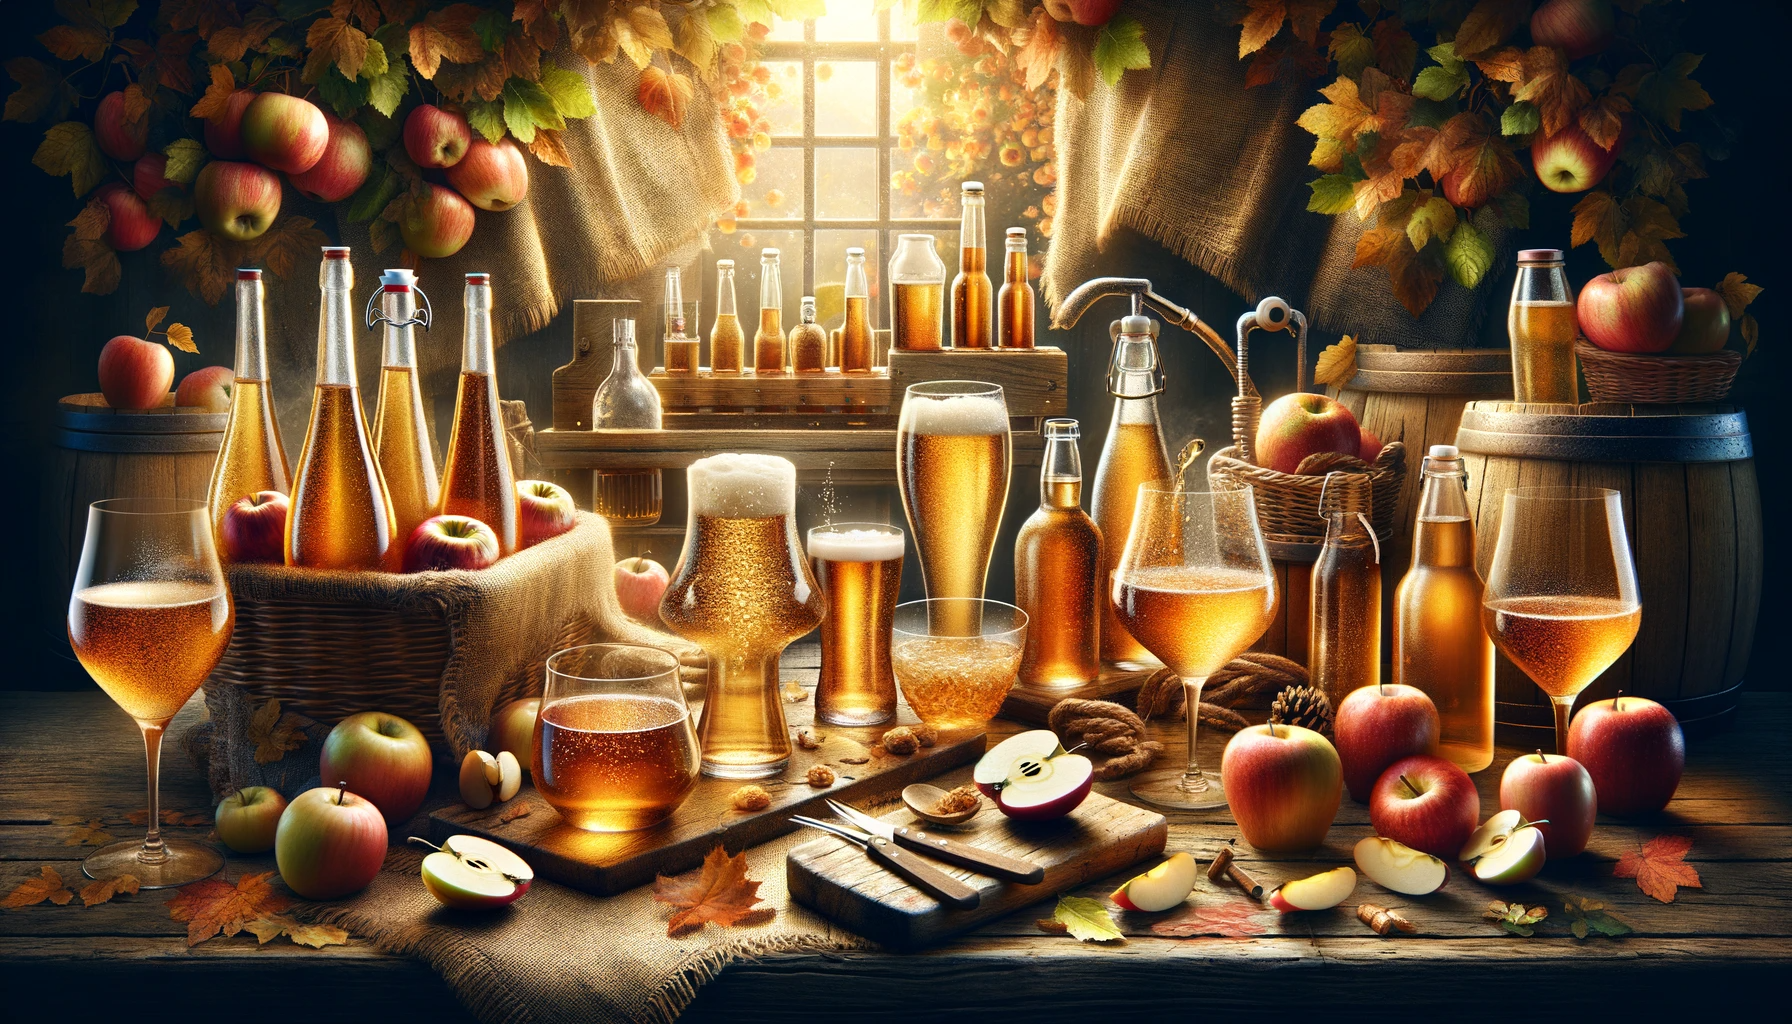 Educational - Cider: A Refreshing Journey from Orchard to Glass. A blog at hangoverstreet.com